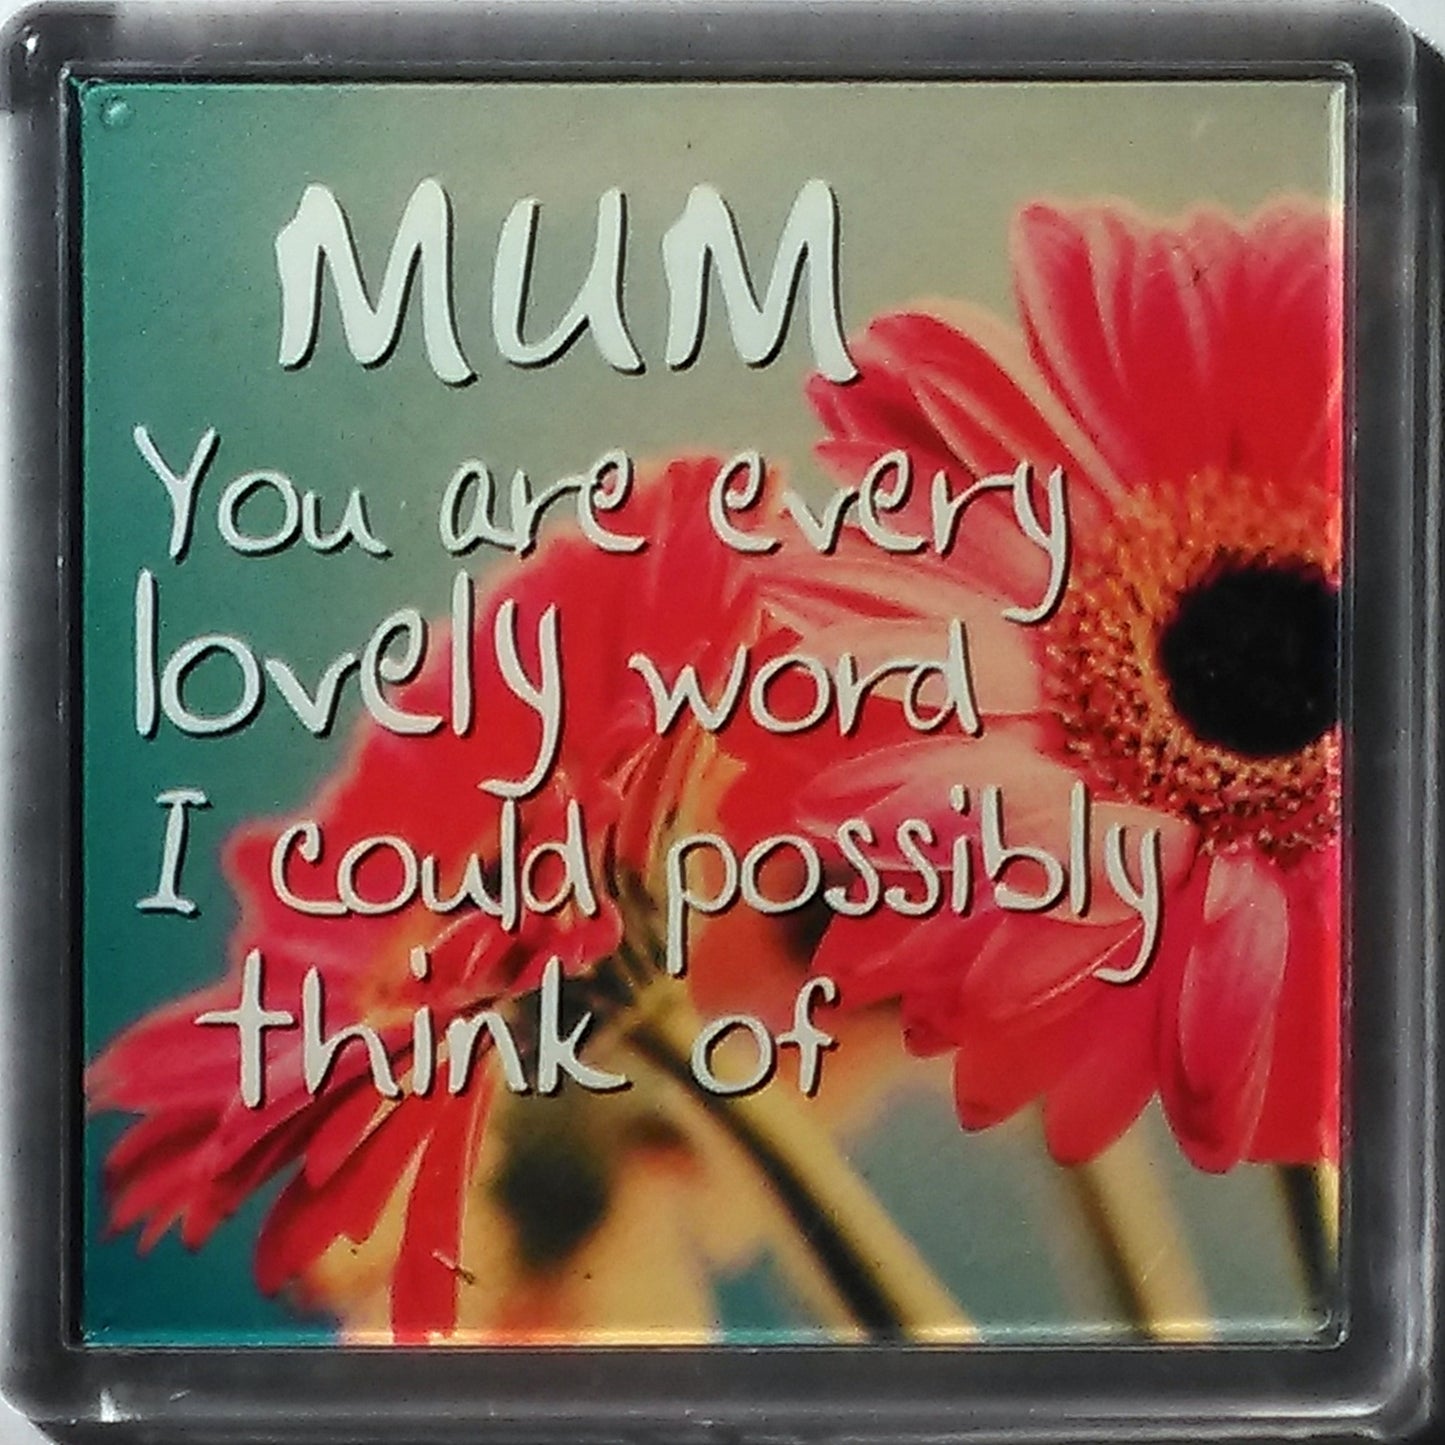 History & Heraldry Sentiment Fridge Magnet "Mum You are every lovely word I could possibly think of."